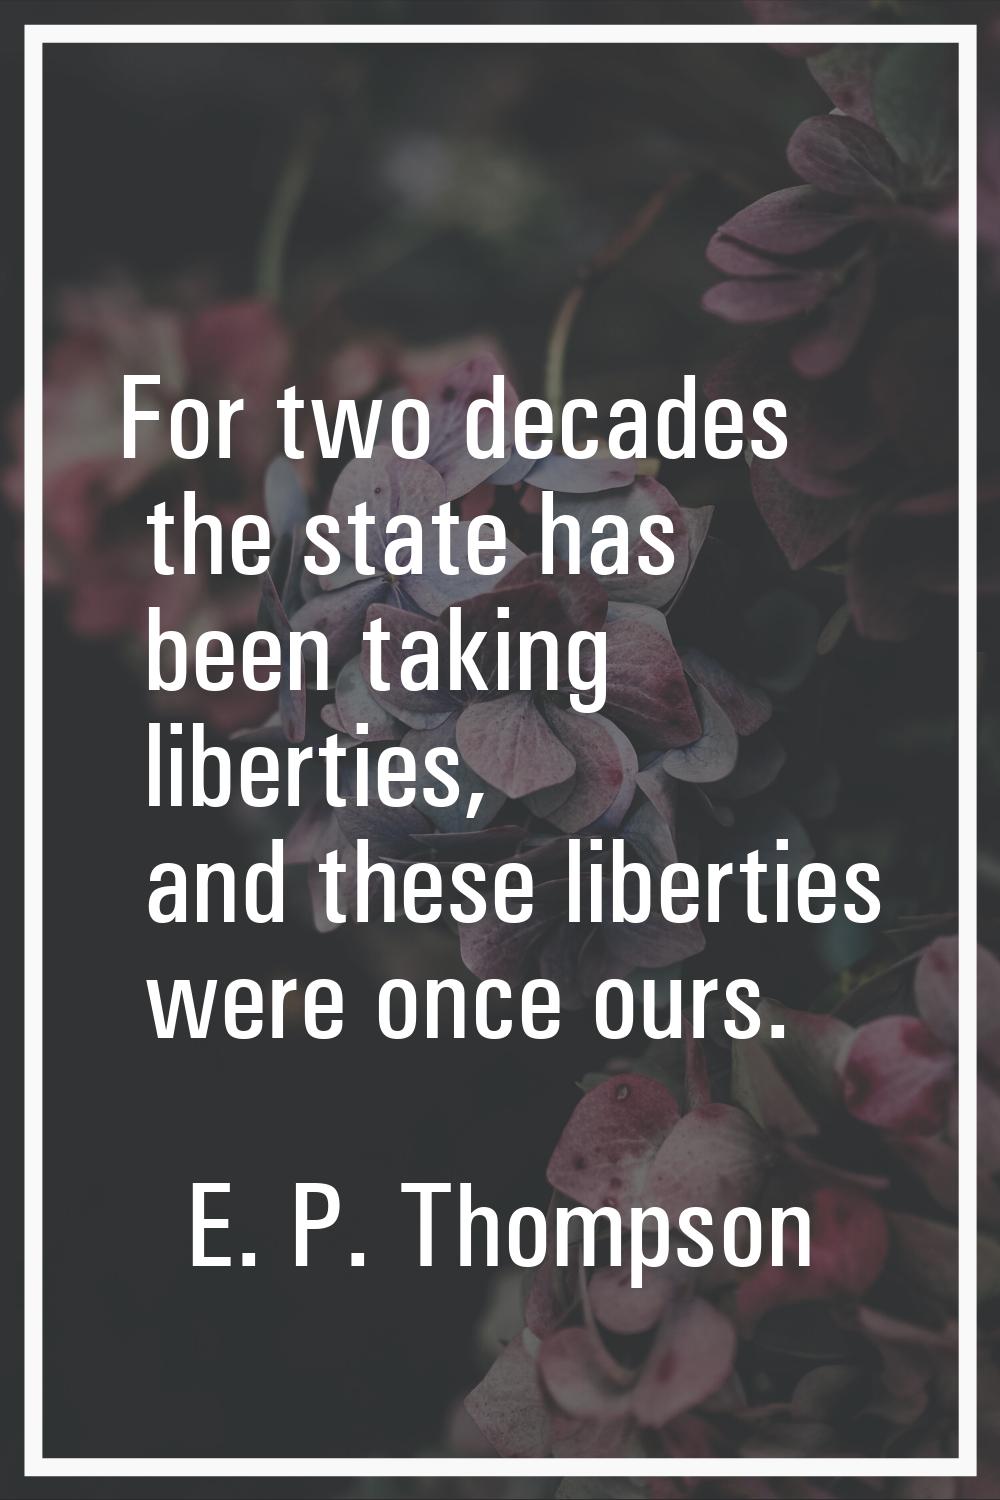 For two decades the state has been taking liberties, and these liberties were once ours.